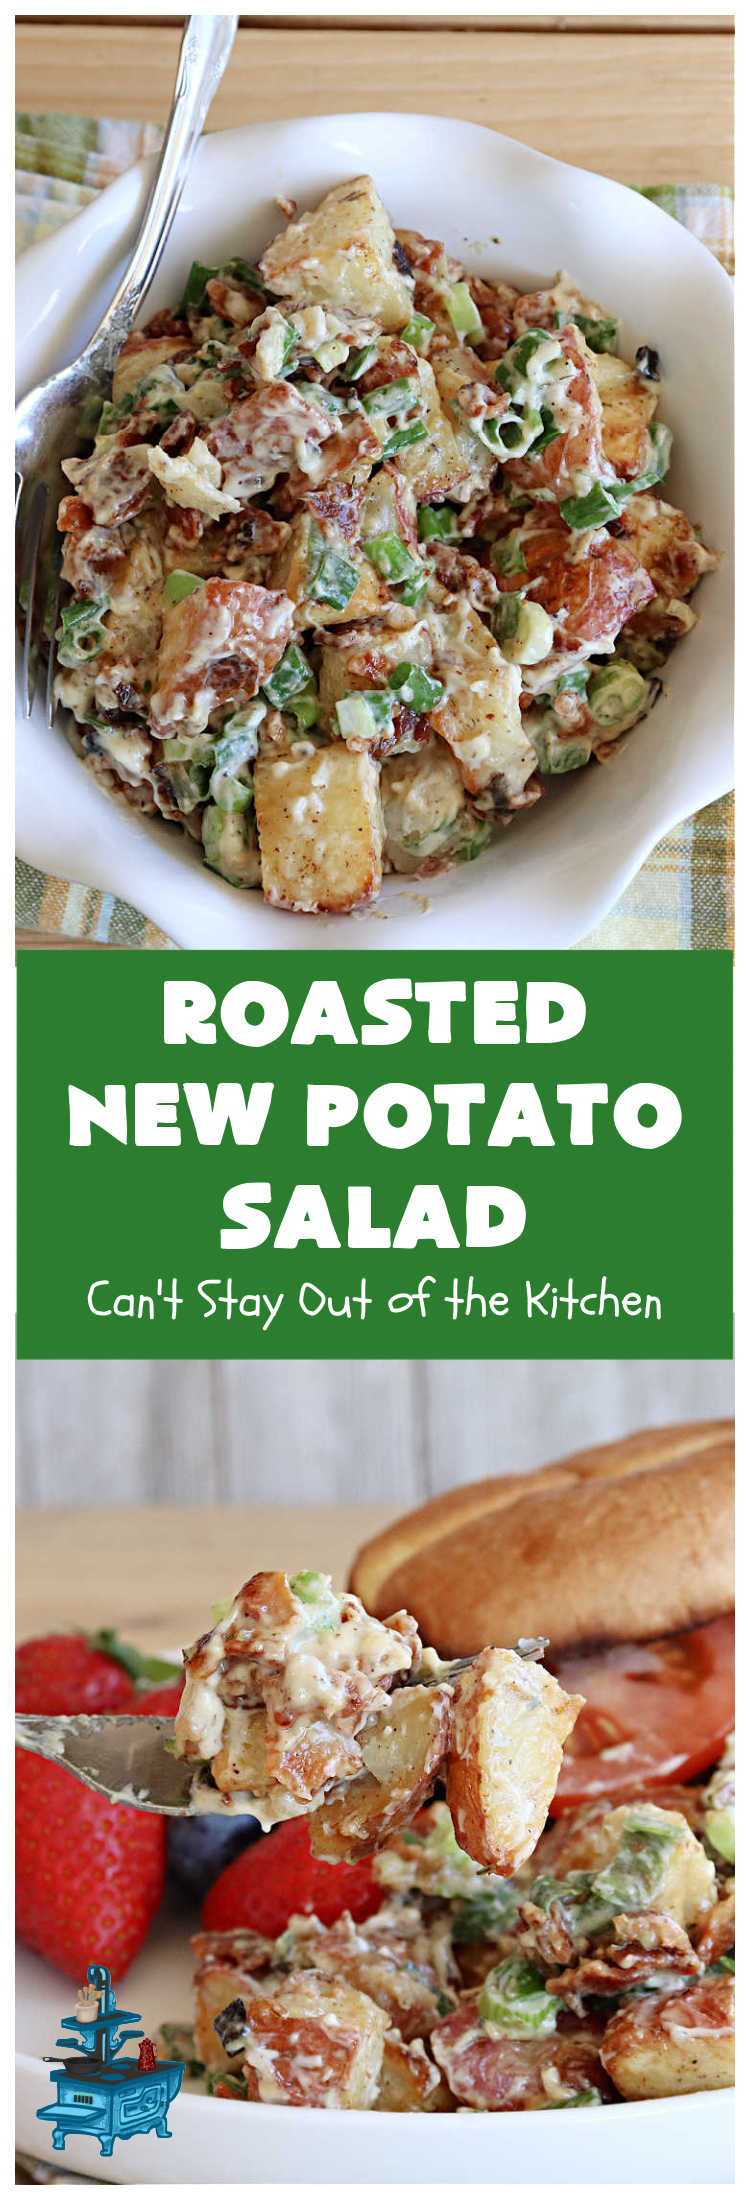 Roasted New Potato Salad | Can't Stay Out of the Kitchen | fantastic #SouthernLiving #recipe made with #bacon & #GreenOnions. The #potatoes are roasted first so they add additional savory flavor to the #PotatoSalad. Great for #tailgating, BBQ or grilling out. #RanchDressing makes this #salad spectacular! #GlutenFree #RoastedNewPotatoSalad